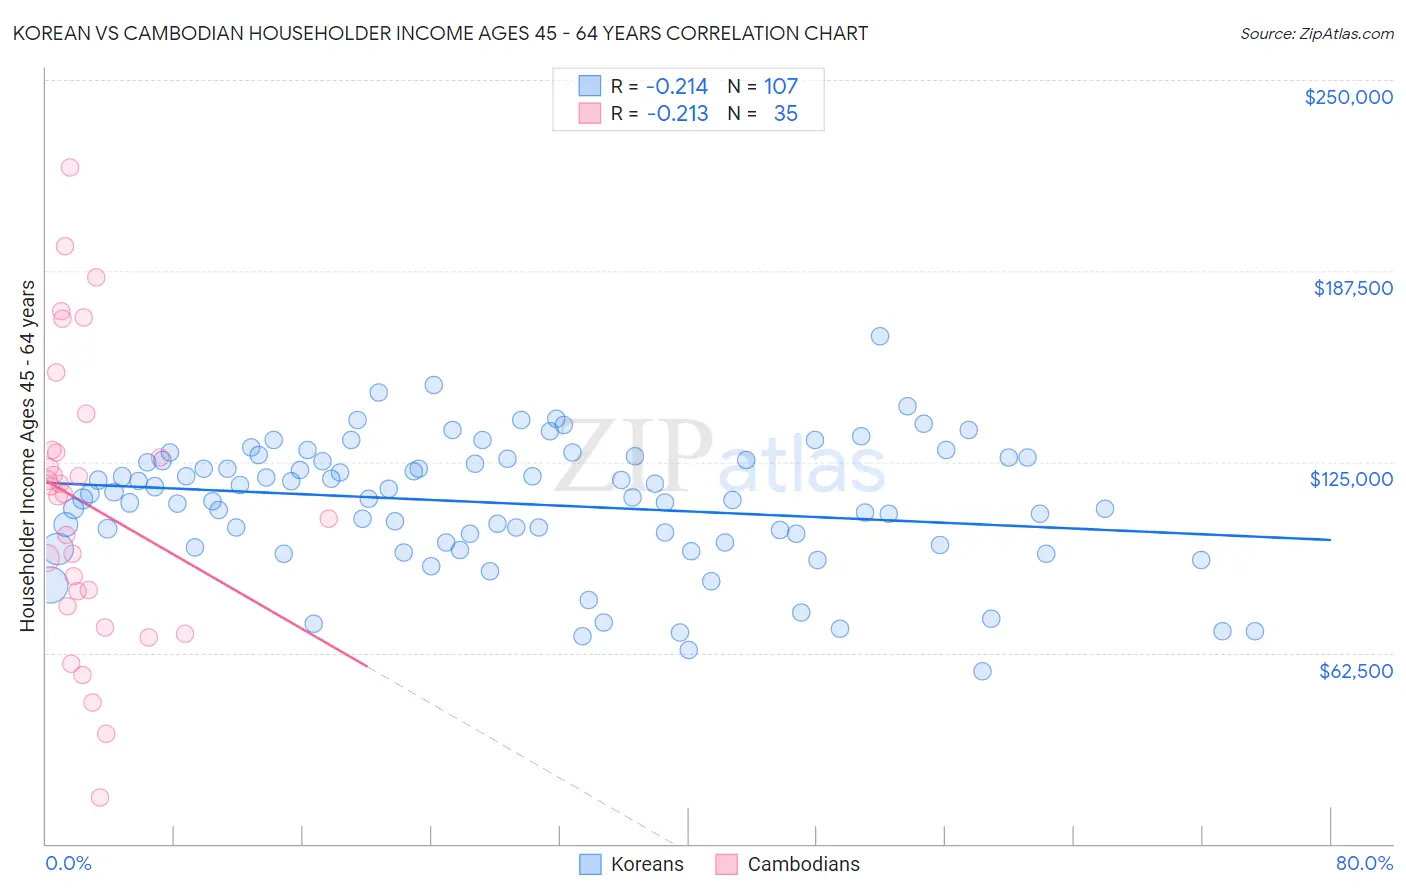 Korean vs Cambodian Householder Income Ages 45 - 64 years